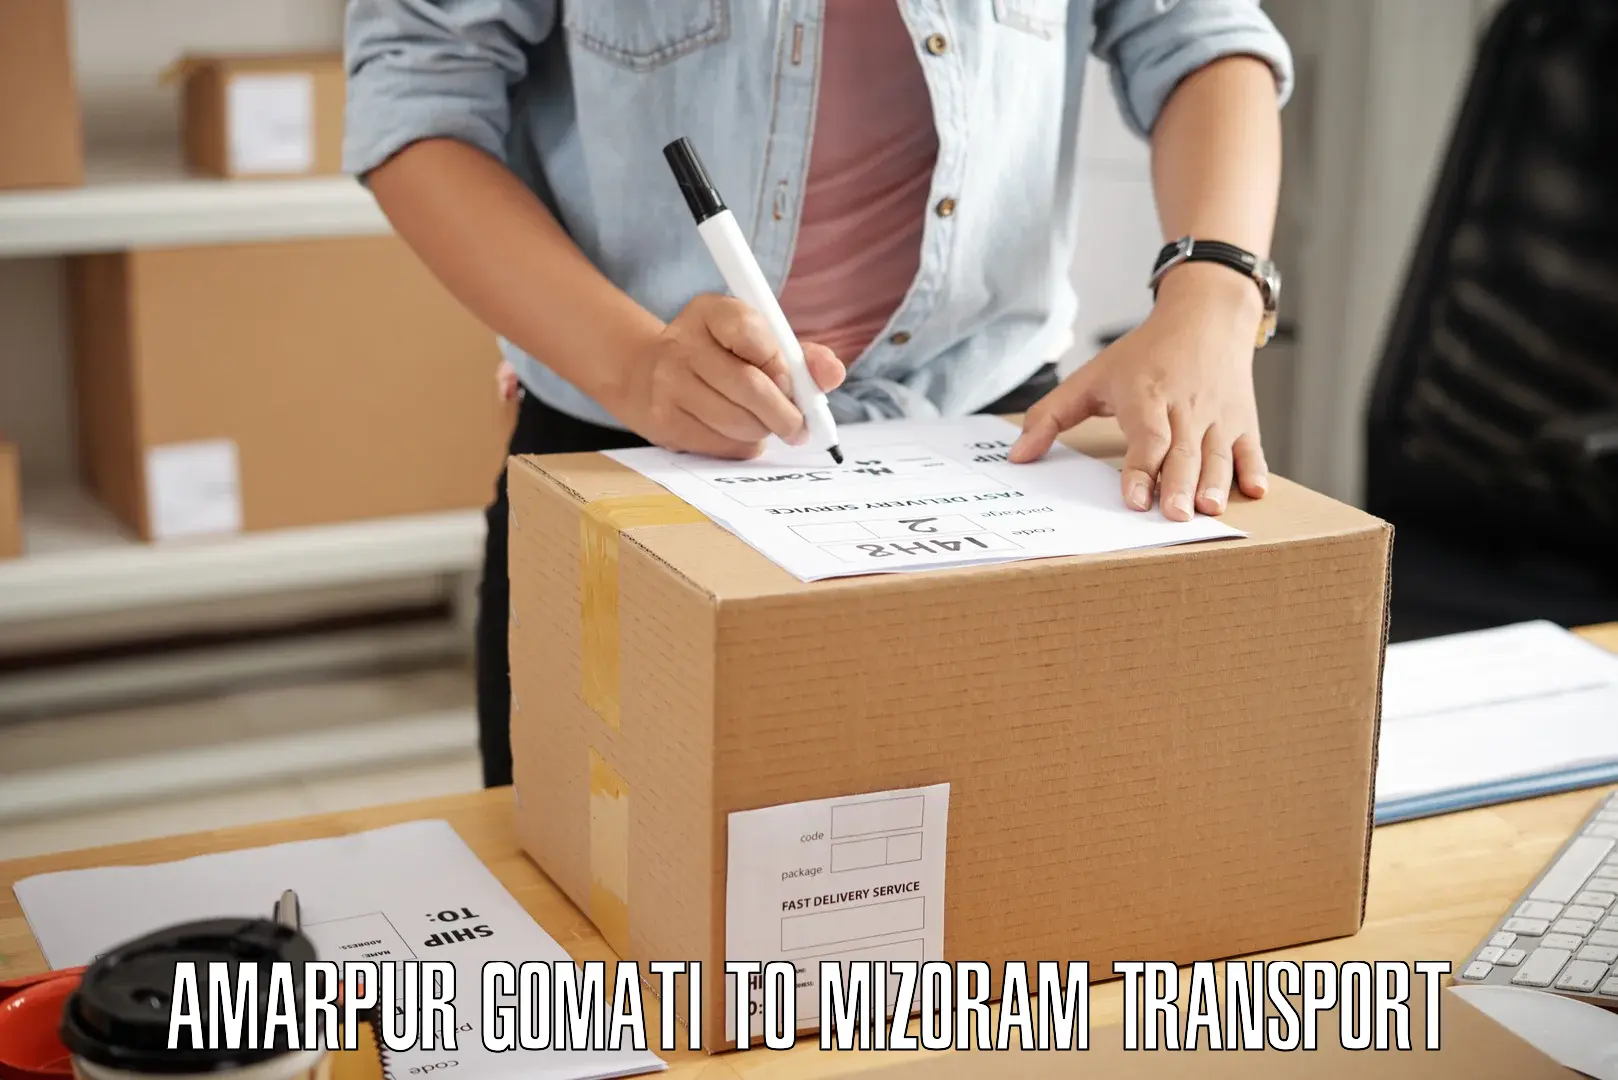 Package delivery services Amarpur Gomati to Mizoram